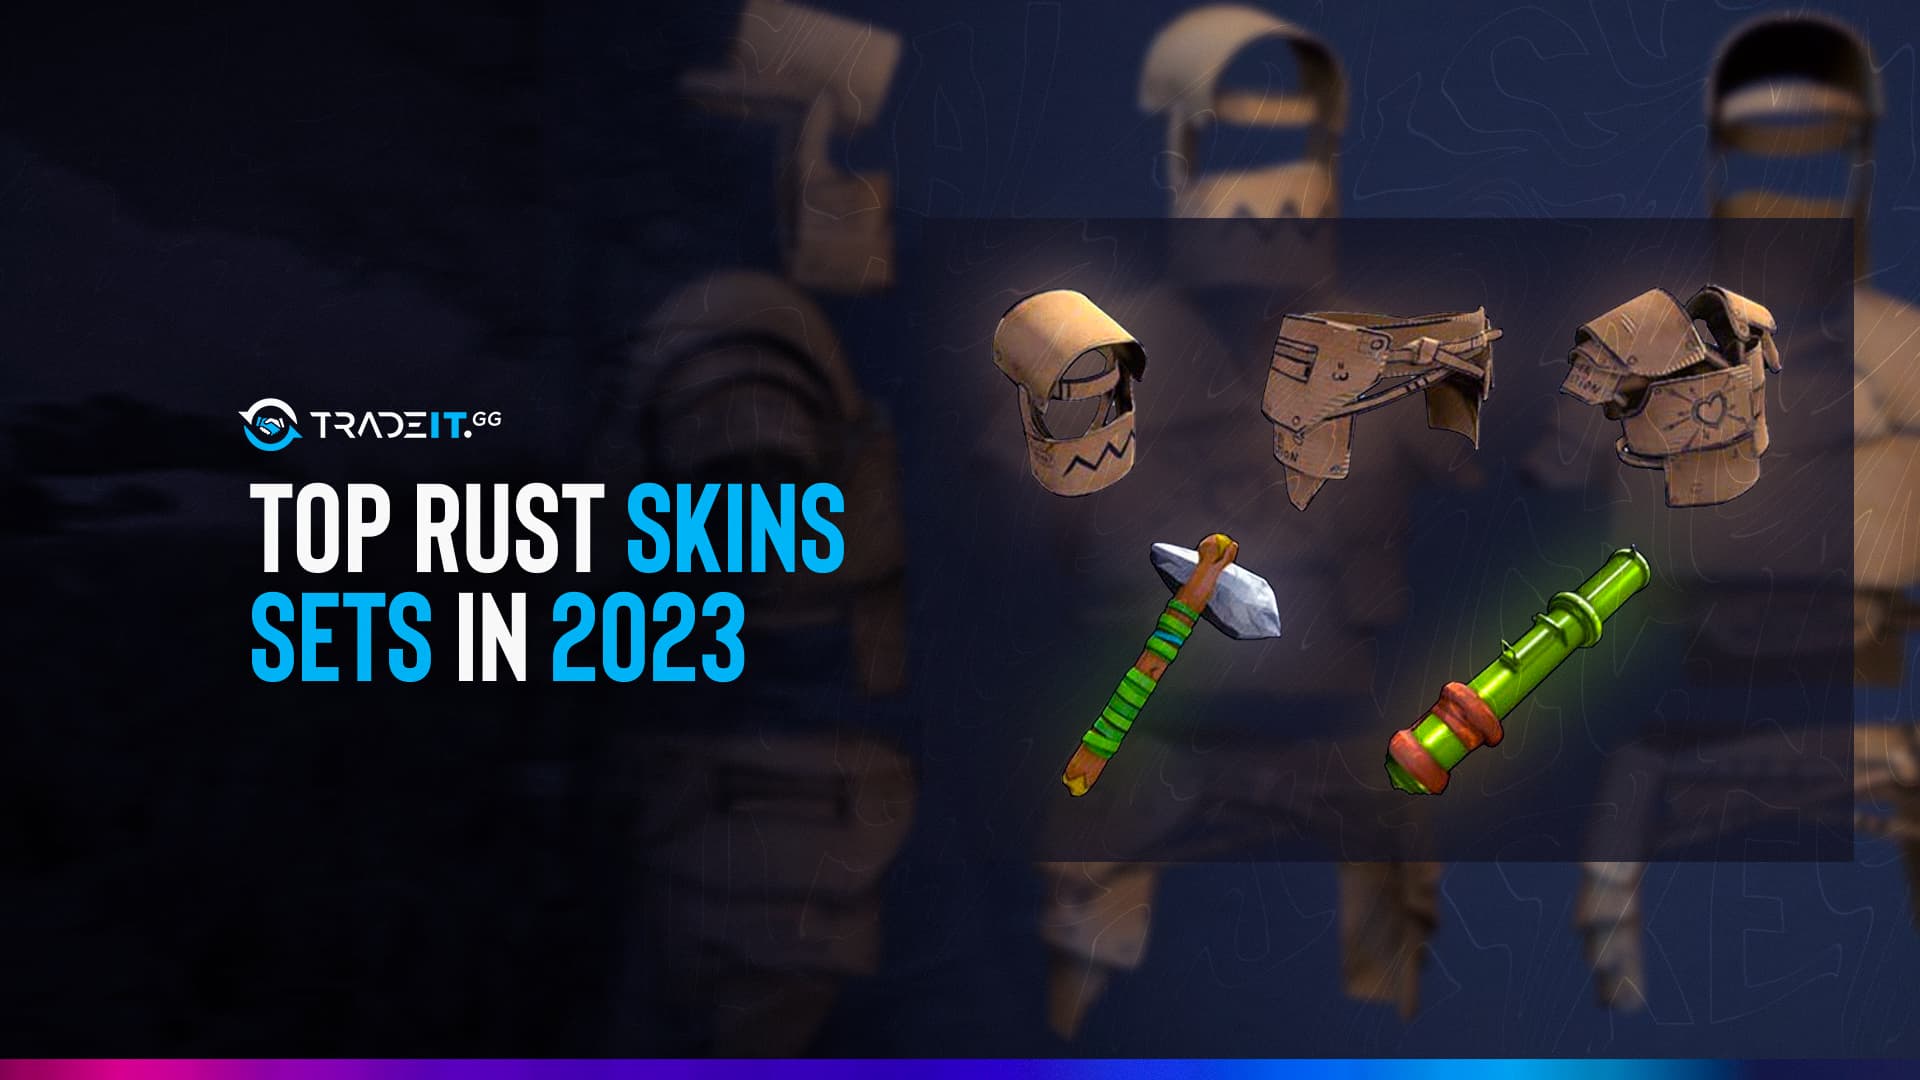 TOP 5 Rust Sets in 2023 | Rated & Reviewed by Tradeit.gg